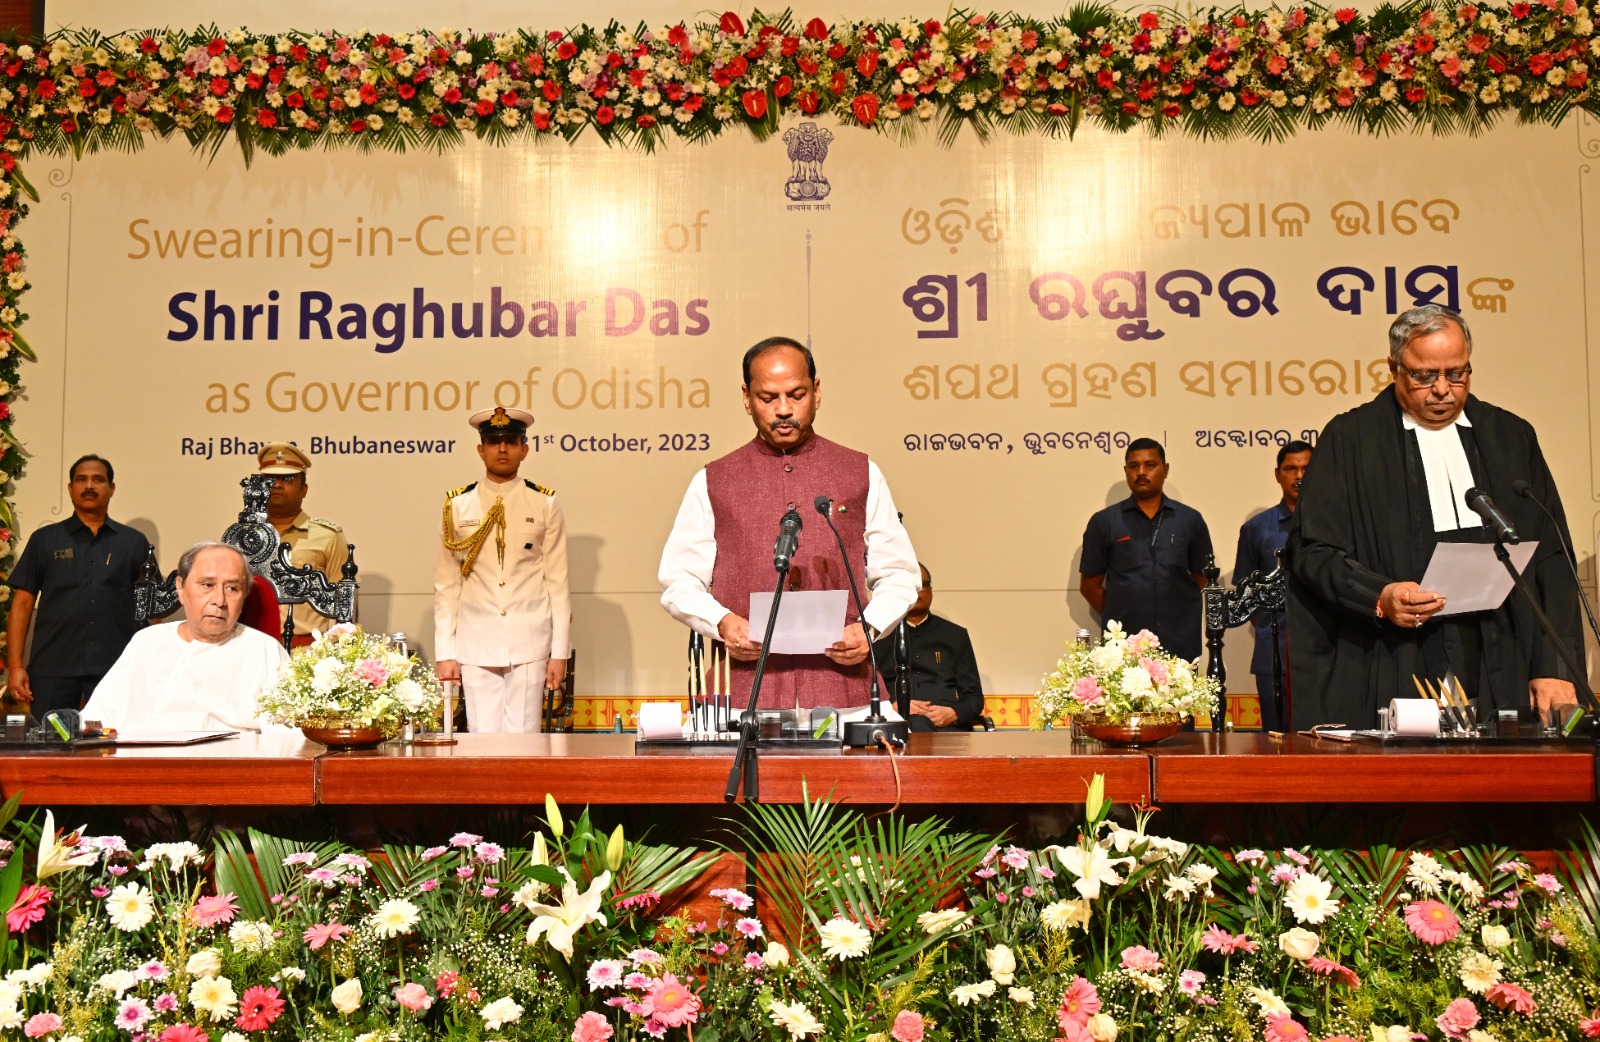 Swearing-in-Ceremony of Hon’ble Governor Shri Raghubar Das, Date: 31-10-2023.